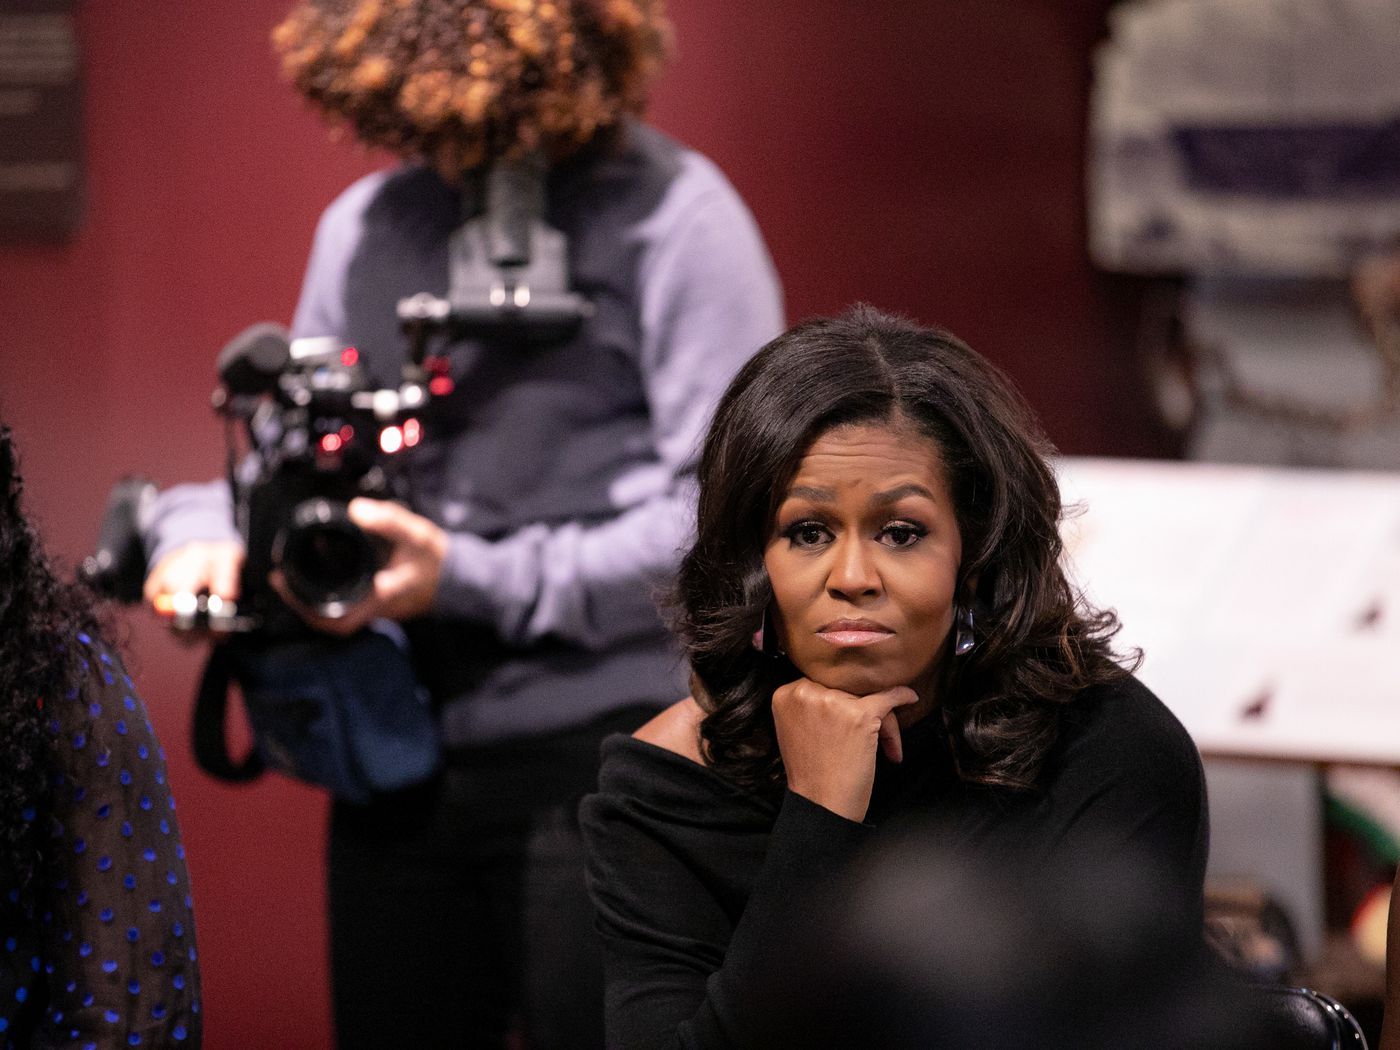 Netflix's new Michelle Obama documentary arrives May 6th